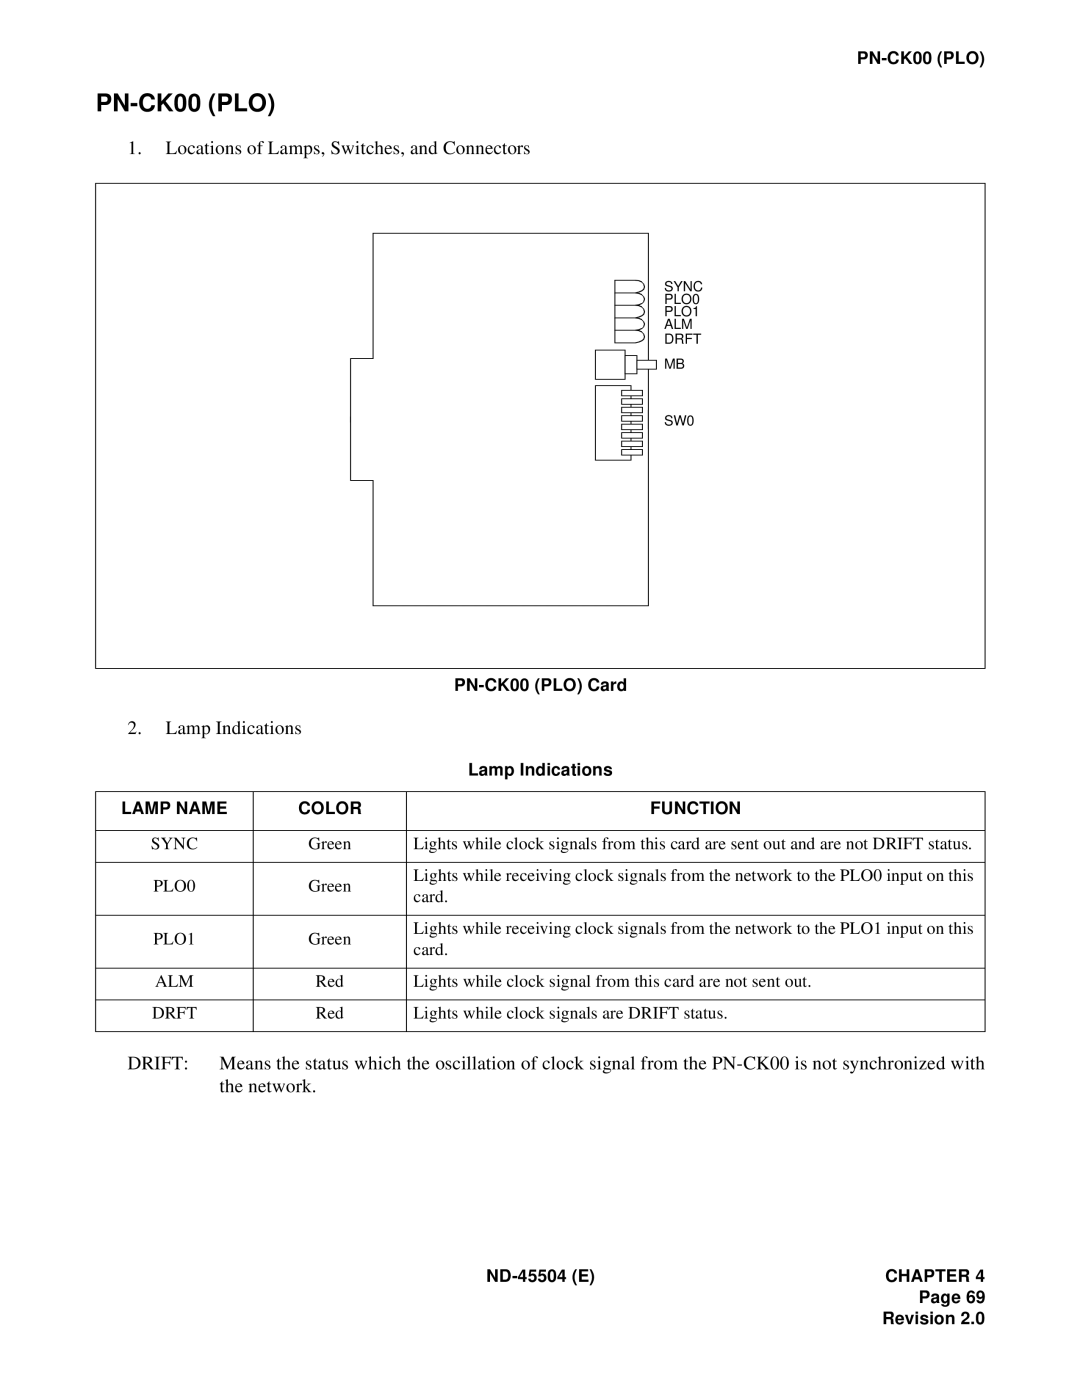 NEC 2000 IVS manual PN-CK00PLO, Locations of Lamps, Switches, and Connectors, Lamp Indications 